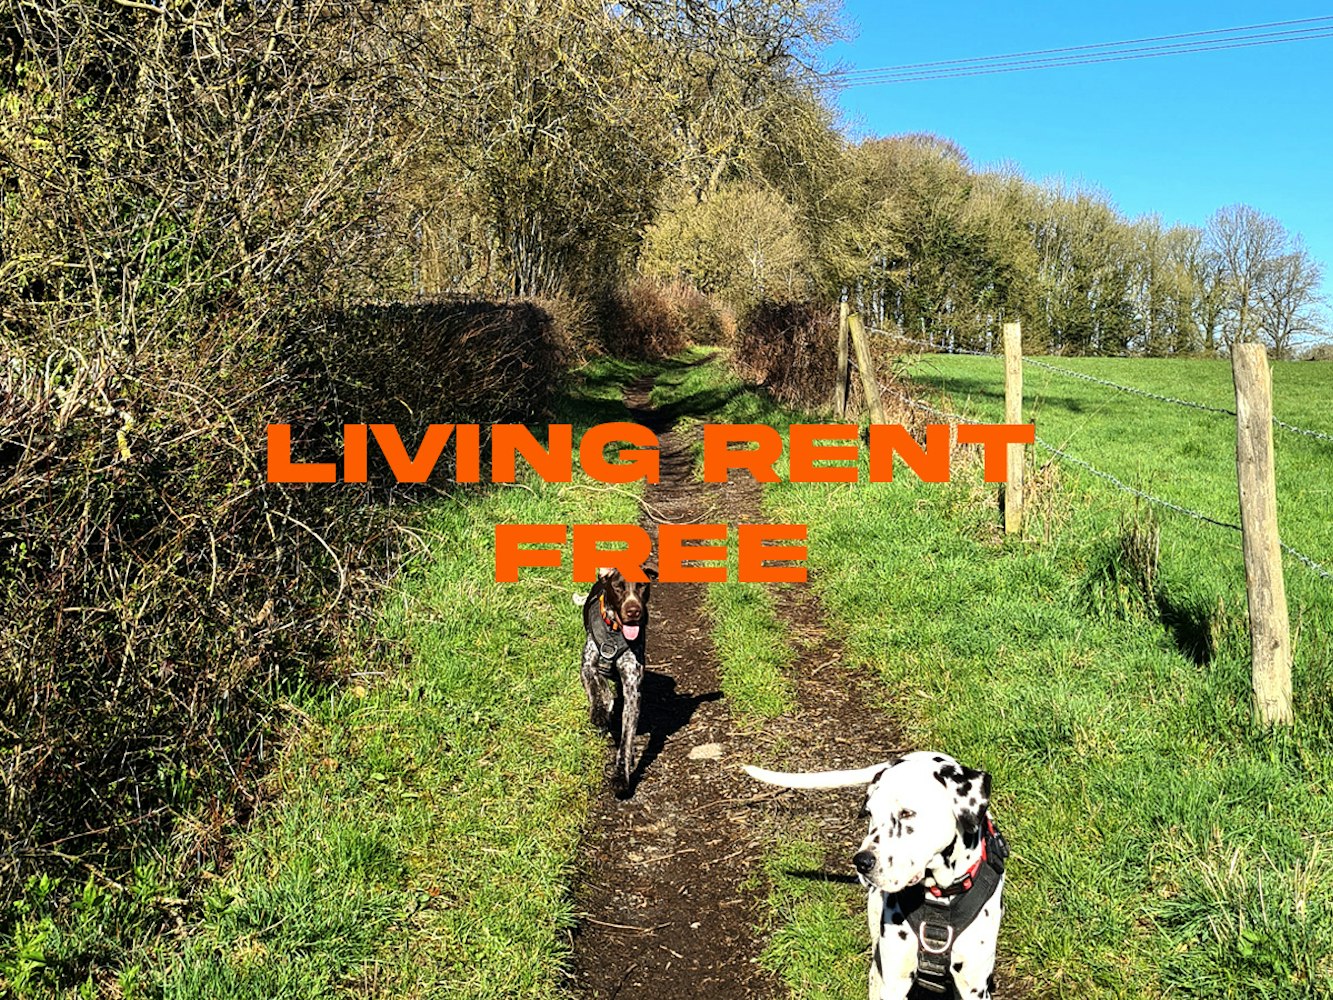 Cover Image for Living rent free. My experience house sitting.